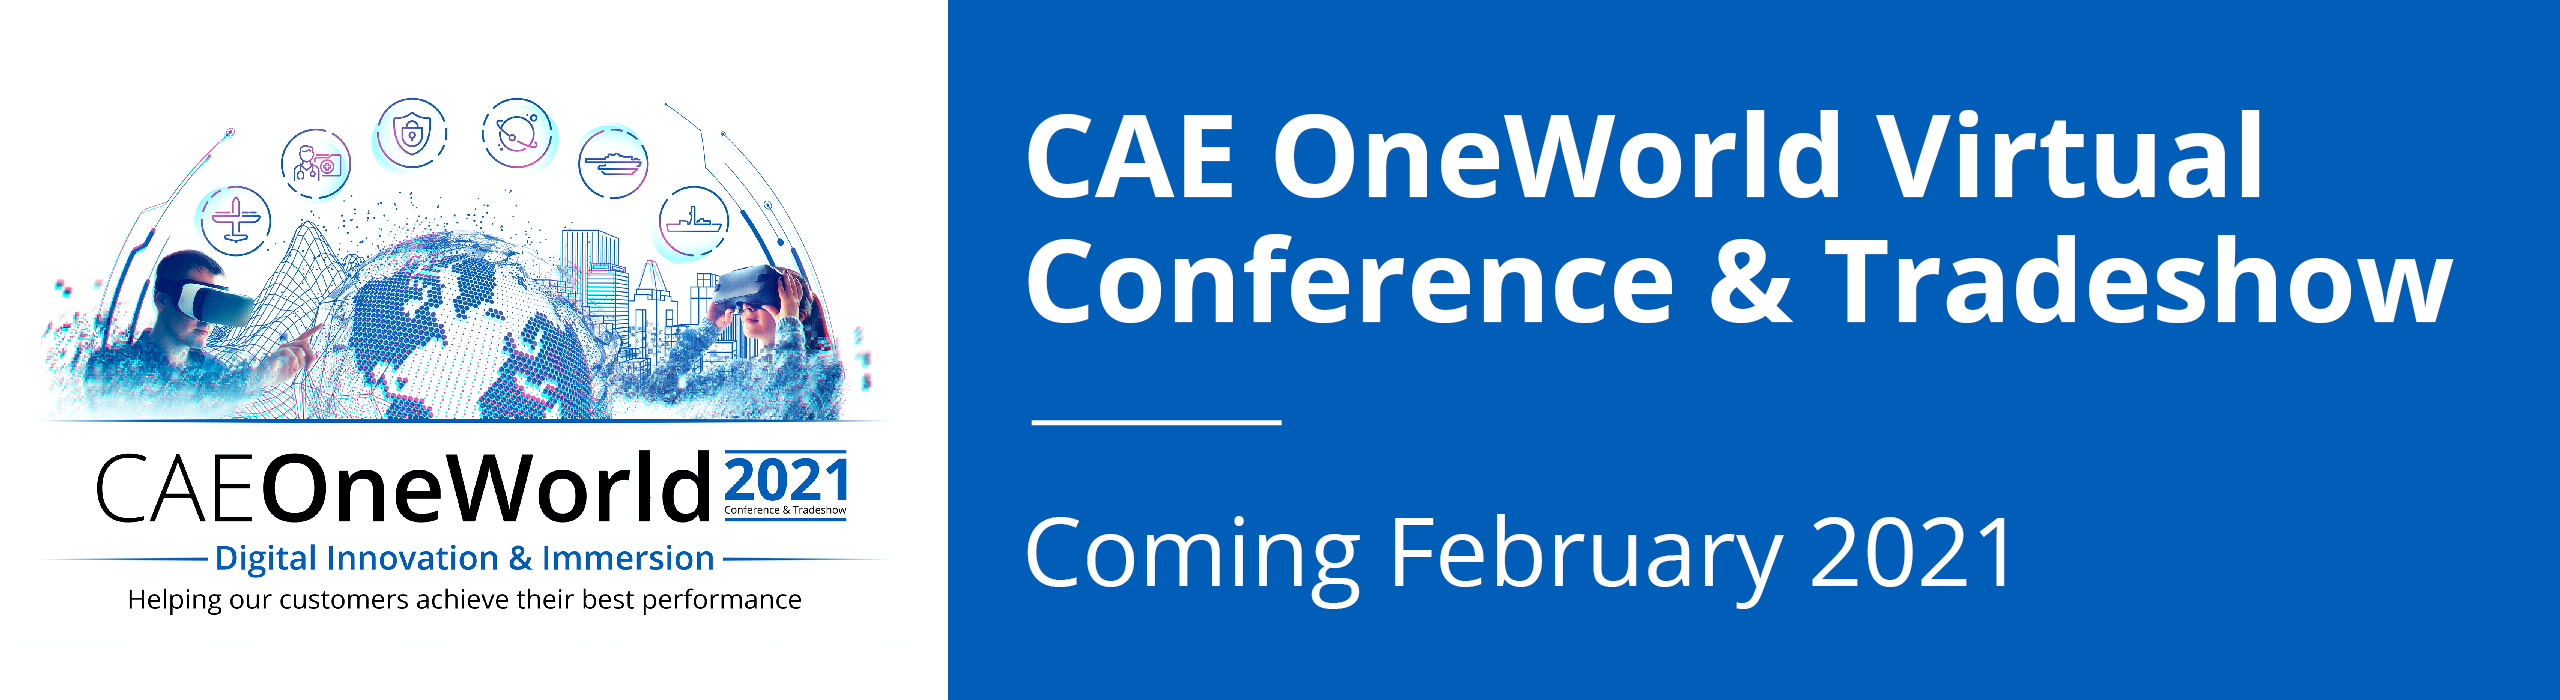 CAE OneWorld Virtual Conference & Tradeshow - Coming February 2021